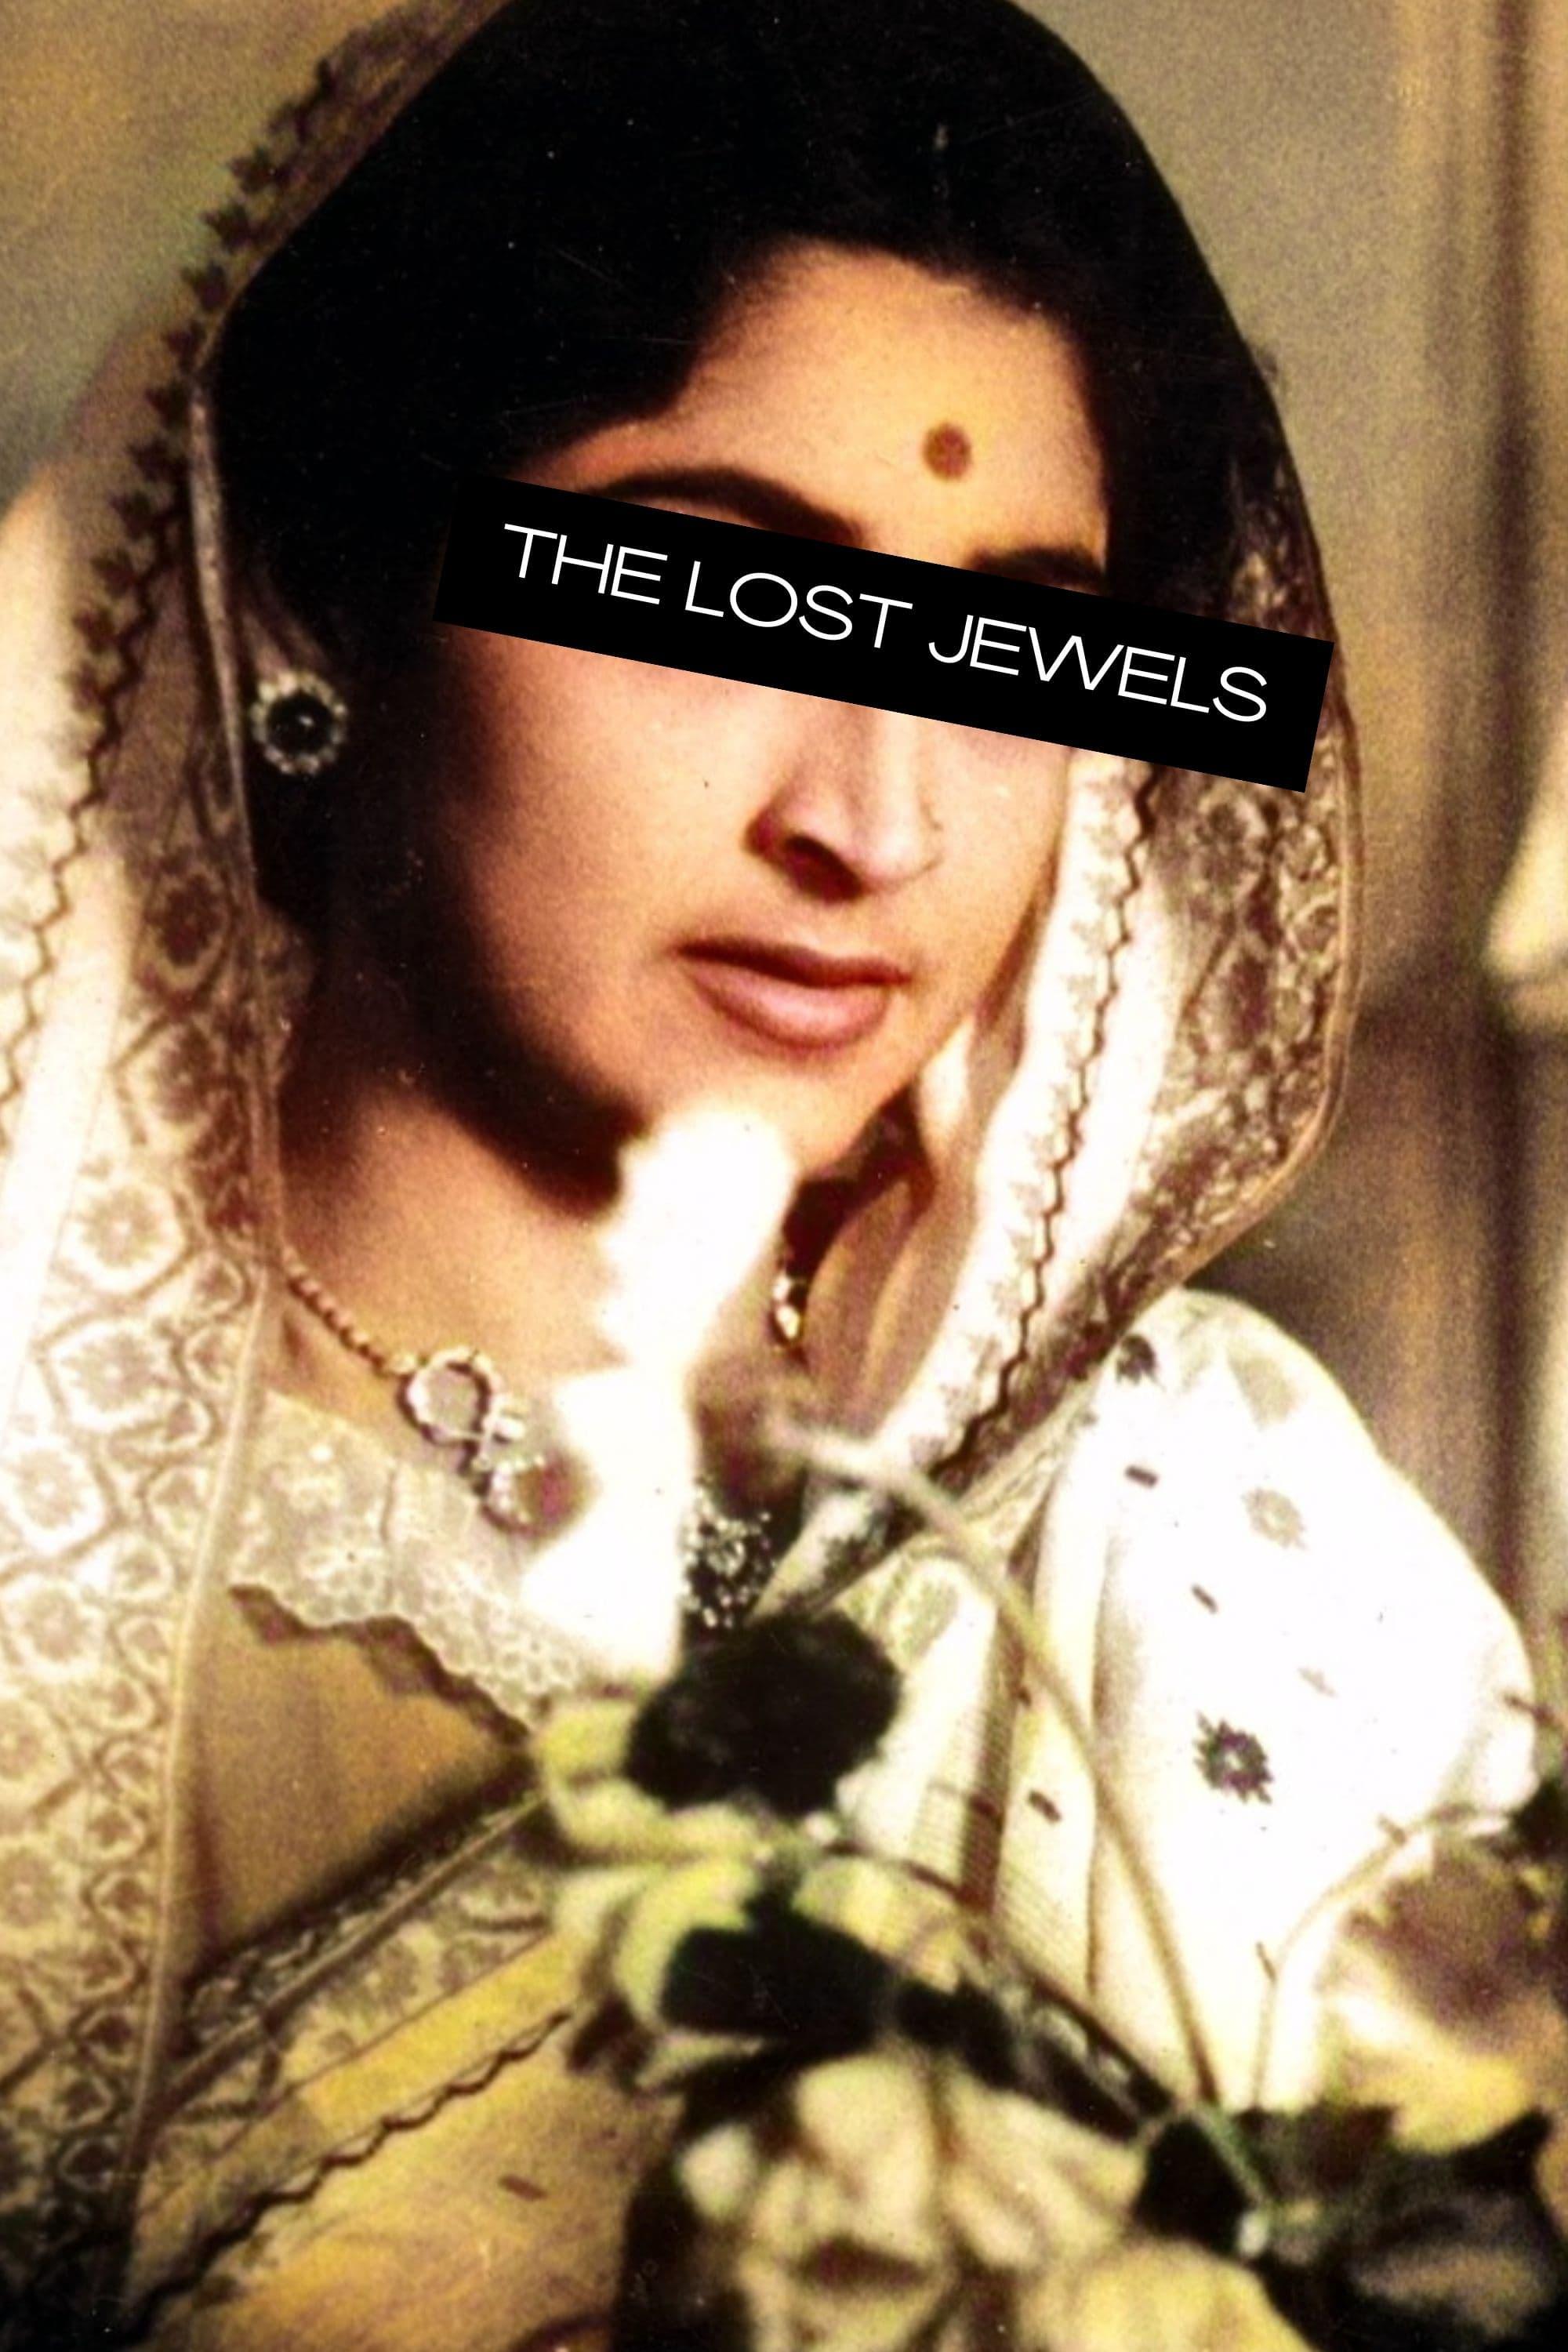 The Lost Jewels poster